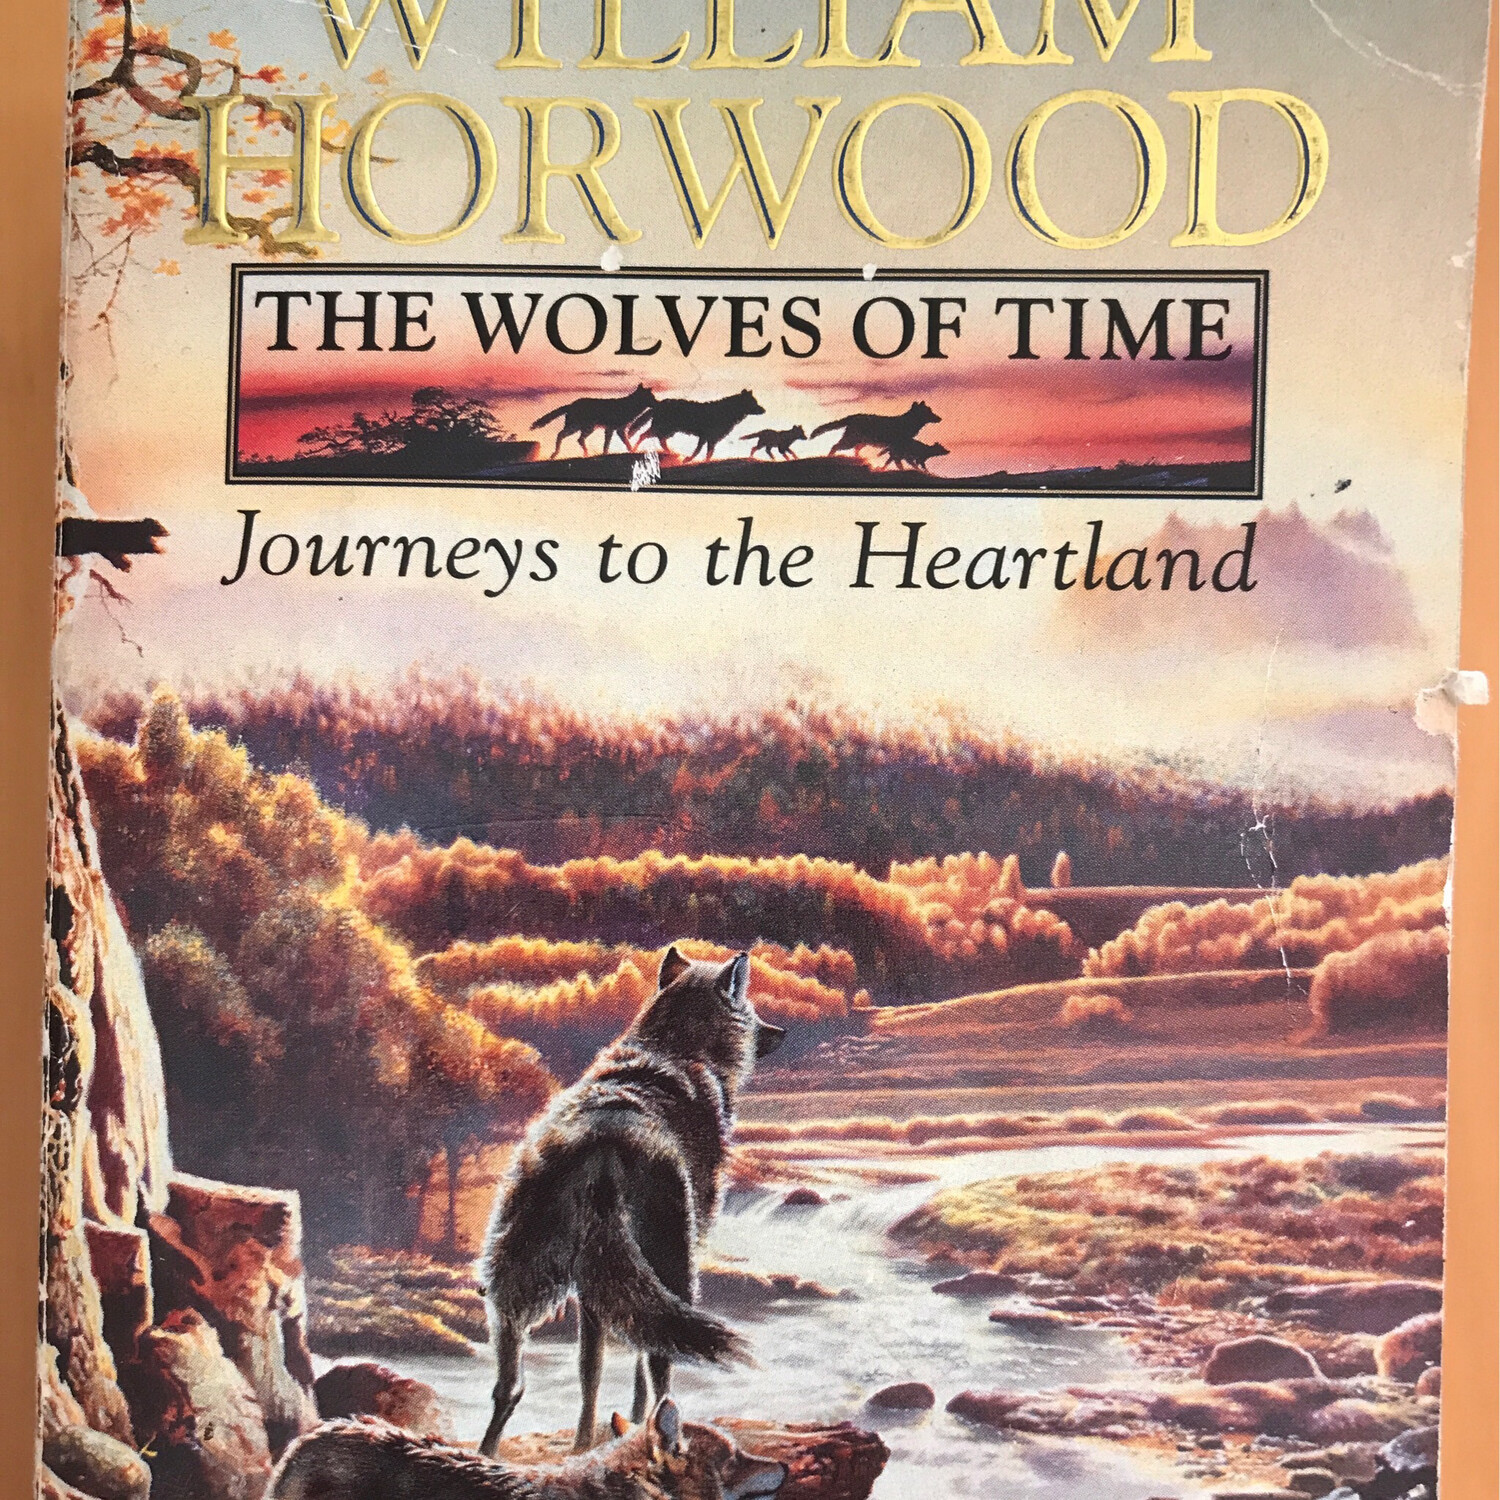 The Wolves Of Time, William Horwood